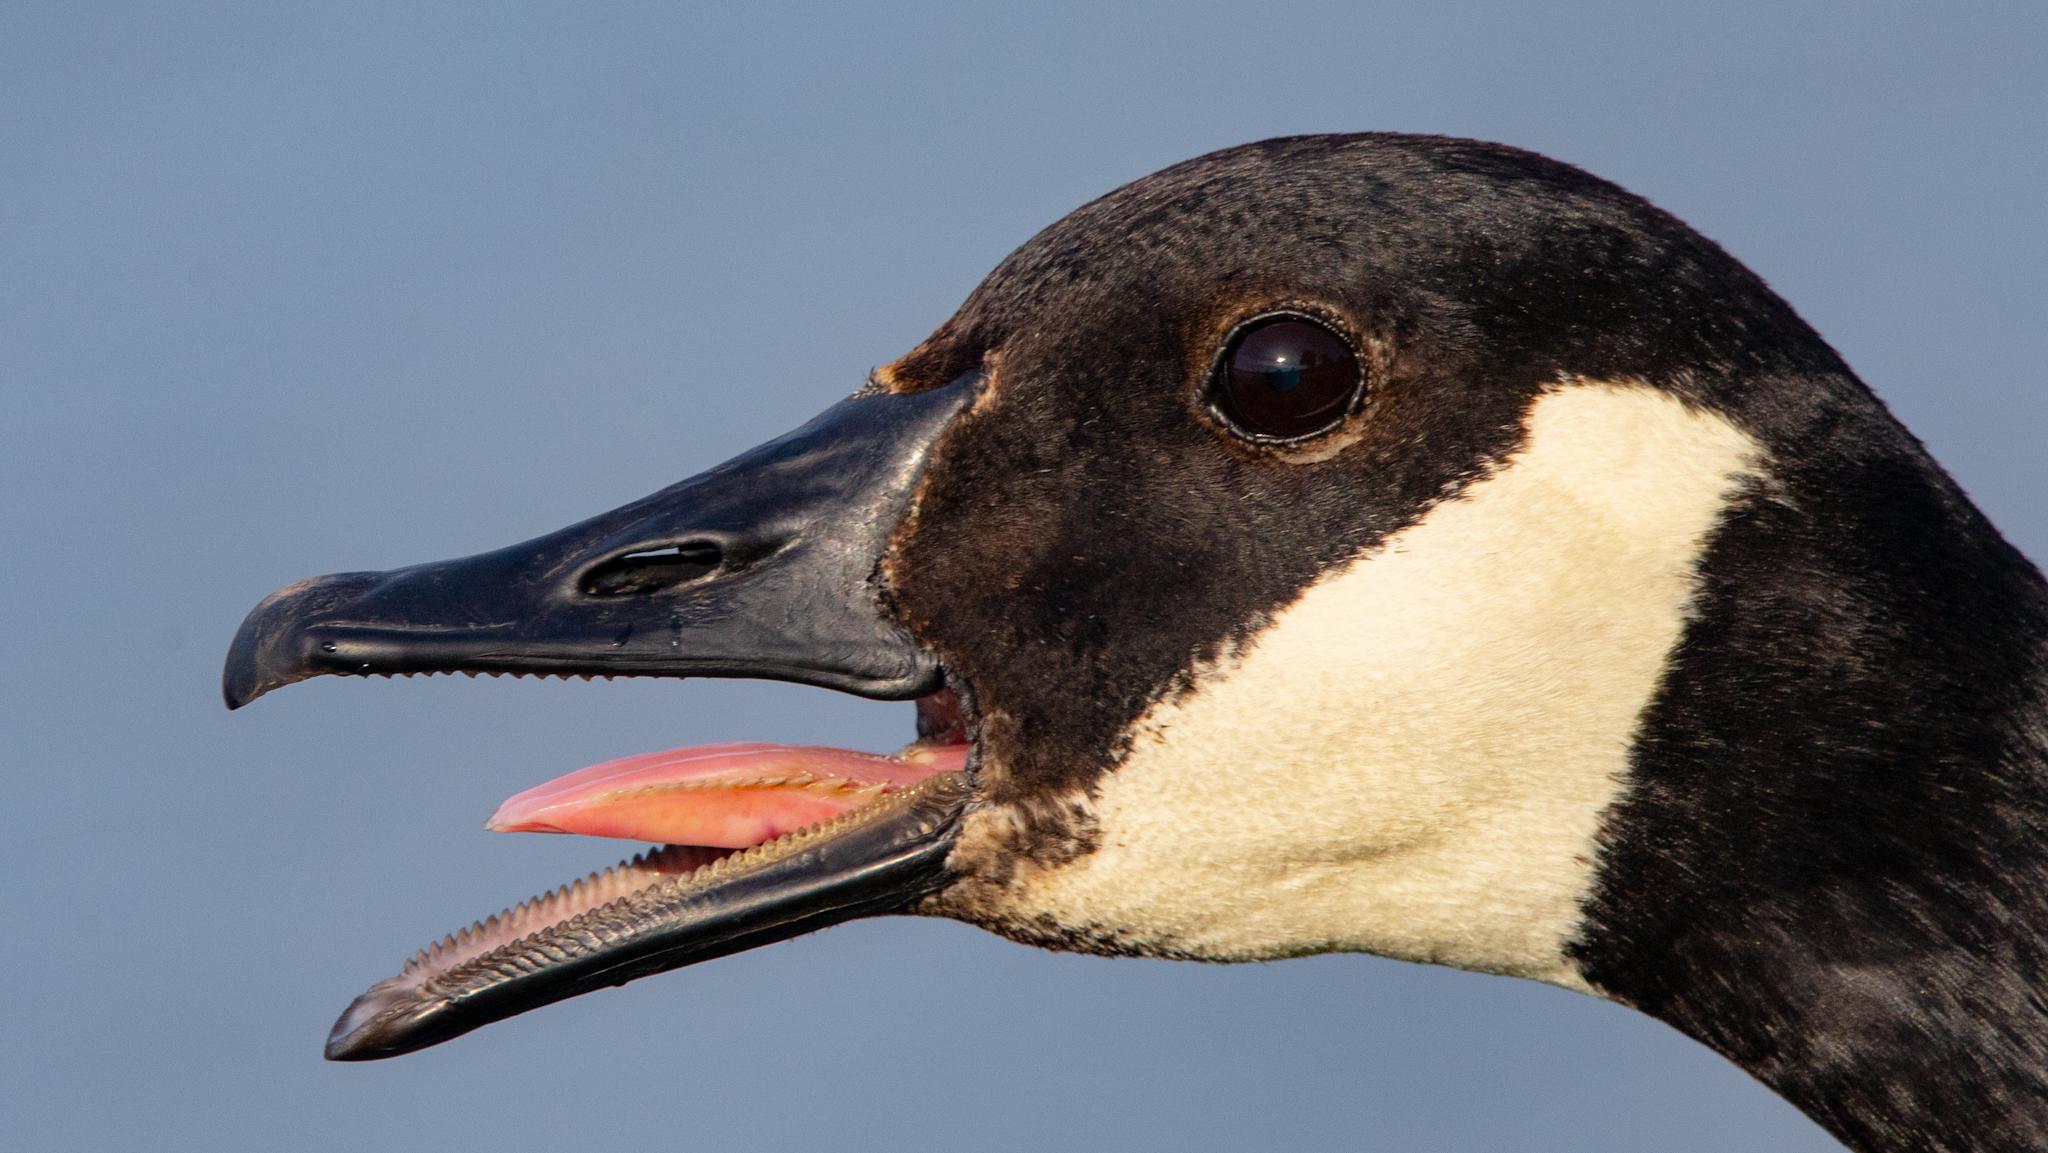 Apparently geese have teeth like tomia on their tongue. :  r/mildlyinteresting